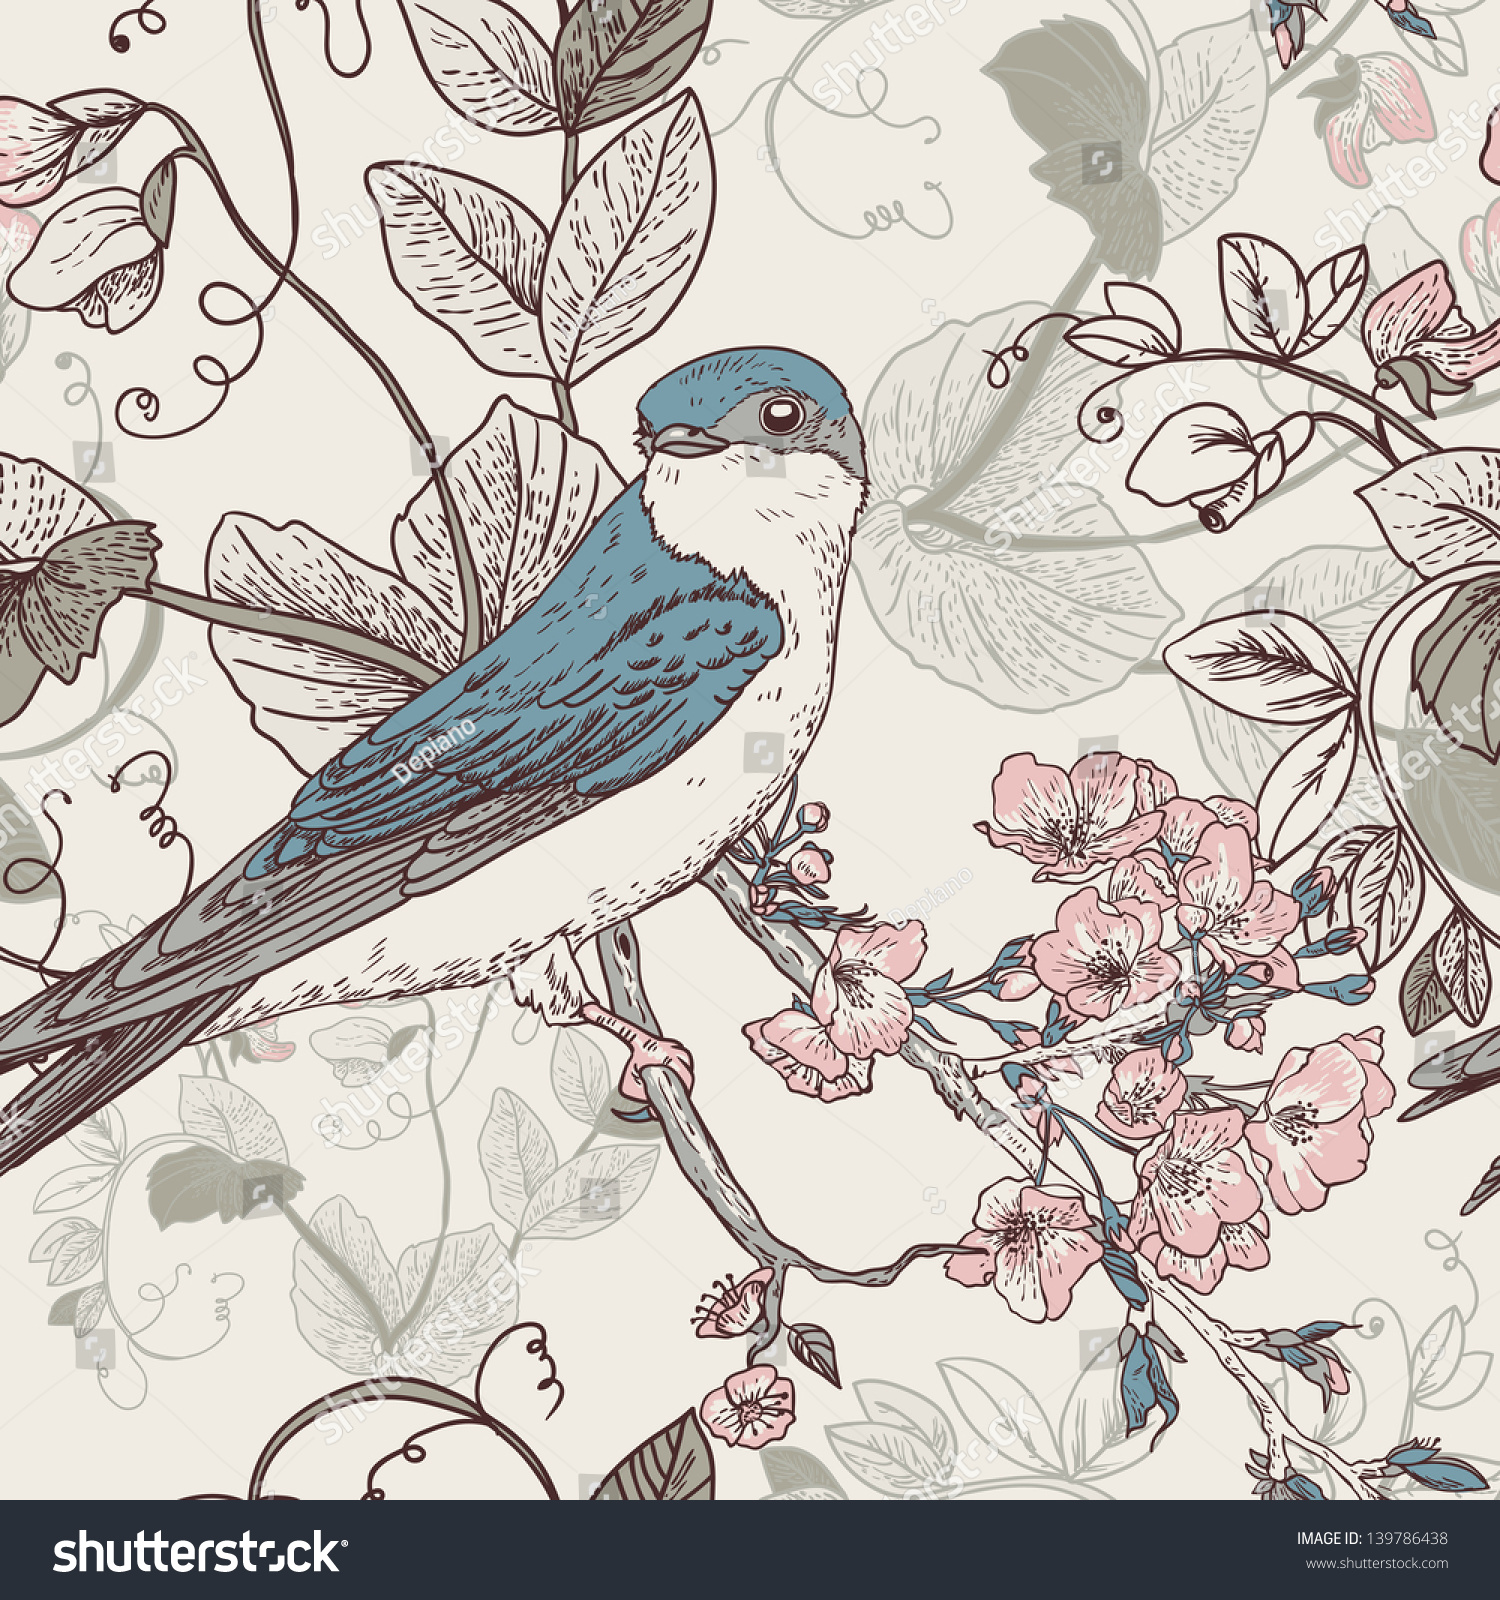 Seamless Floral Background Bird Wallpaper Vintage Stock Vector Royalty Free 139786438